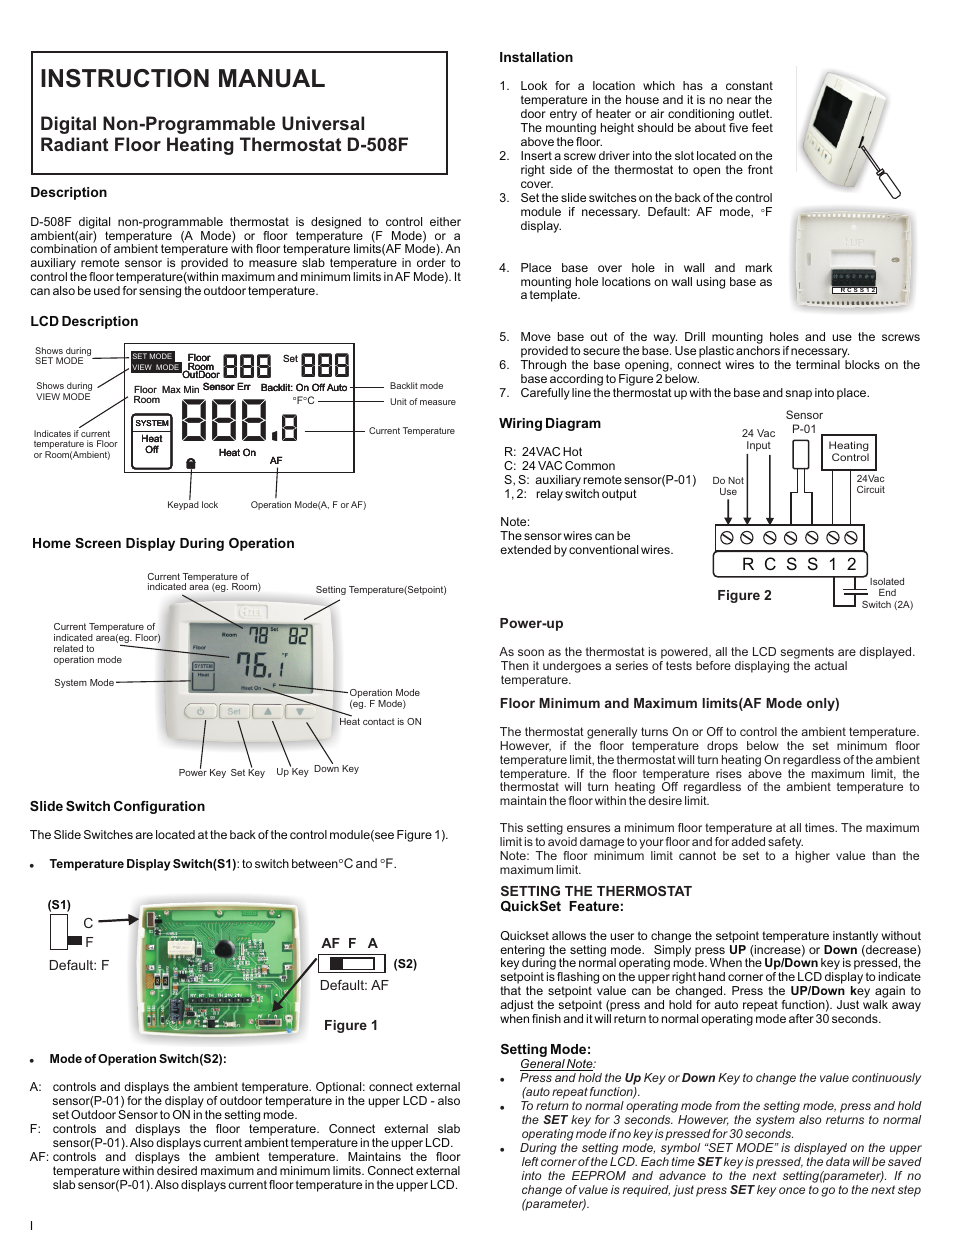 DIGITAL NON-PROGRAMMABLE THERMOSTAT FOR HYDRONIC RADIANT FLOOR HEATING